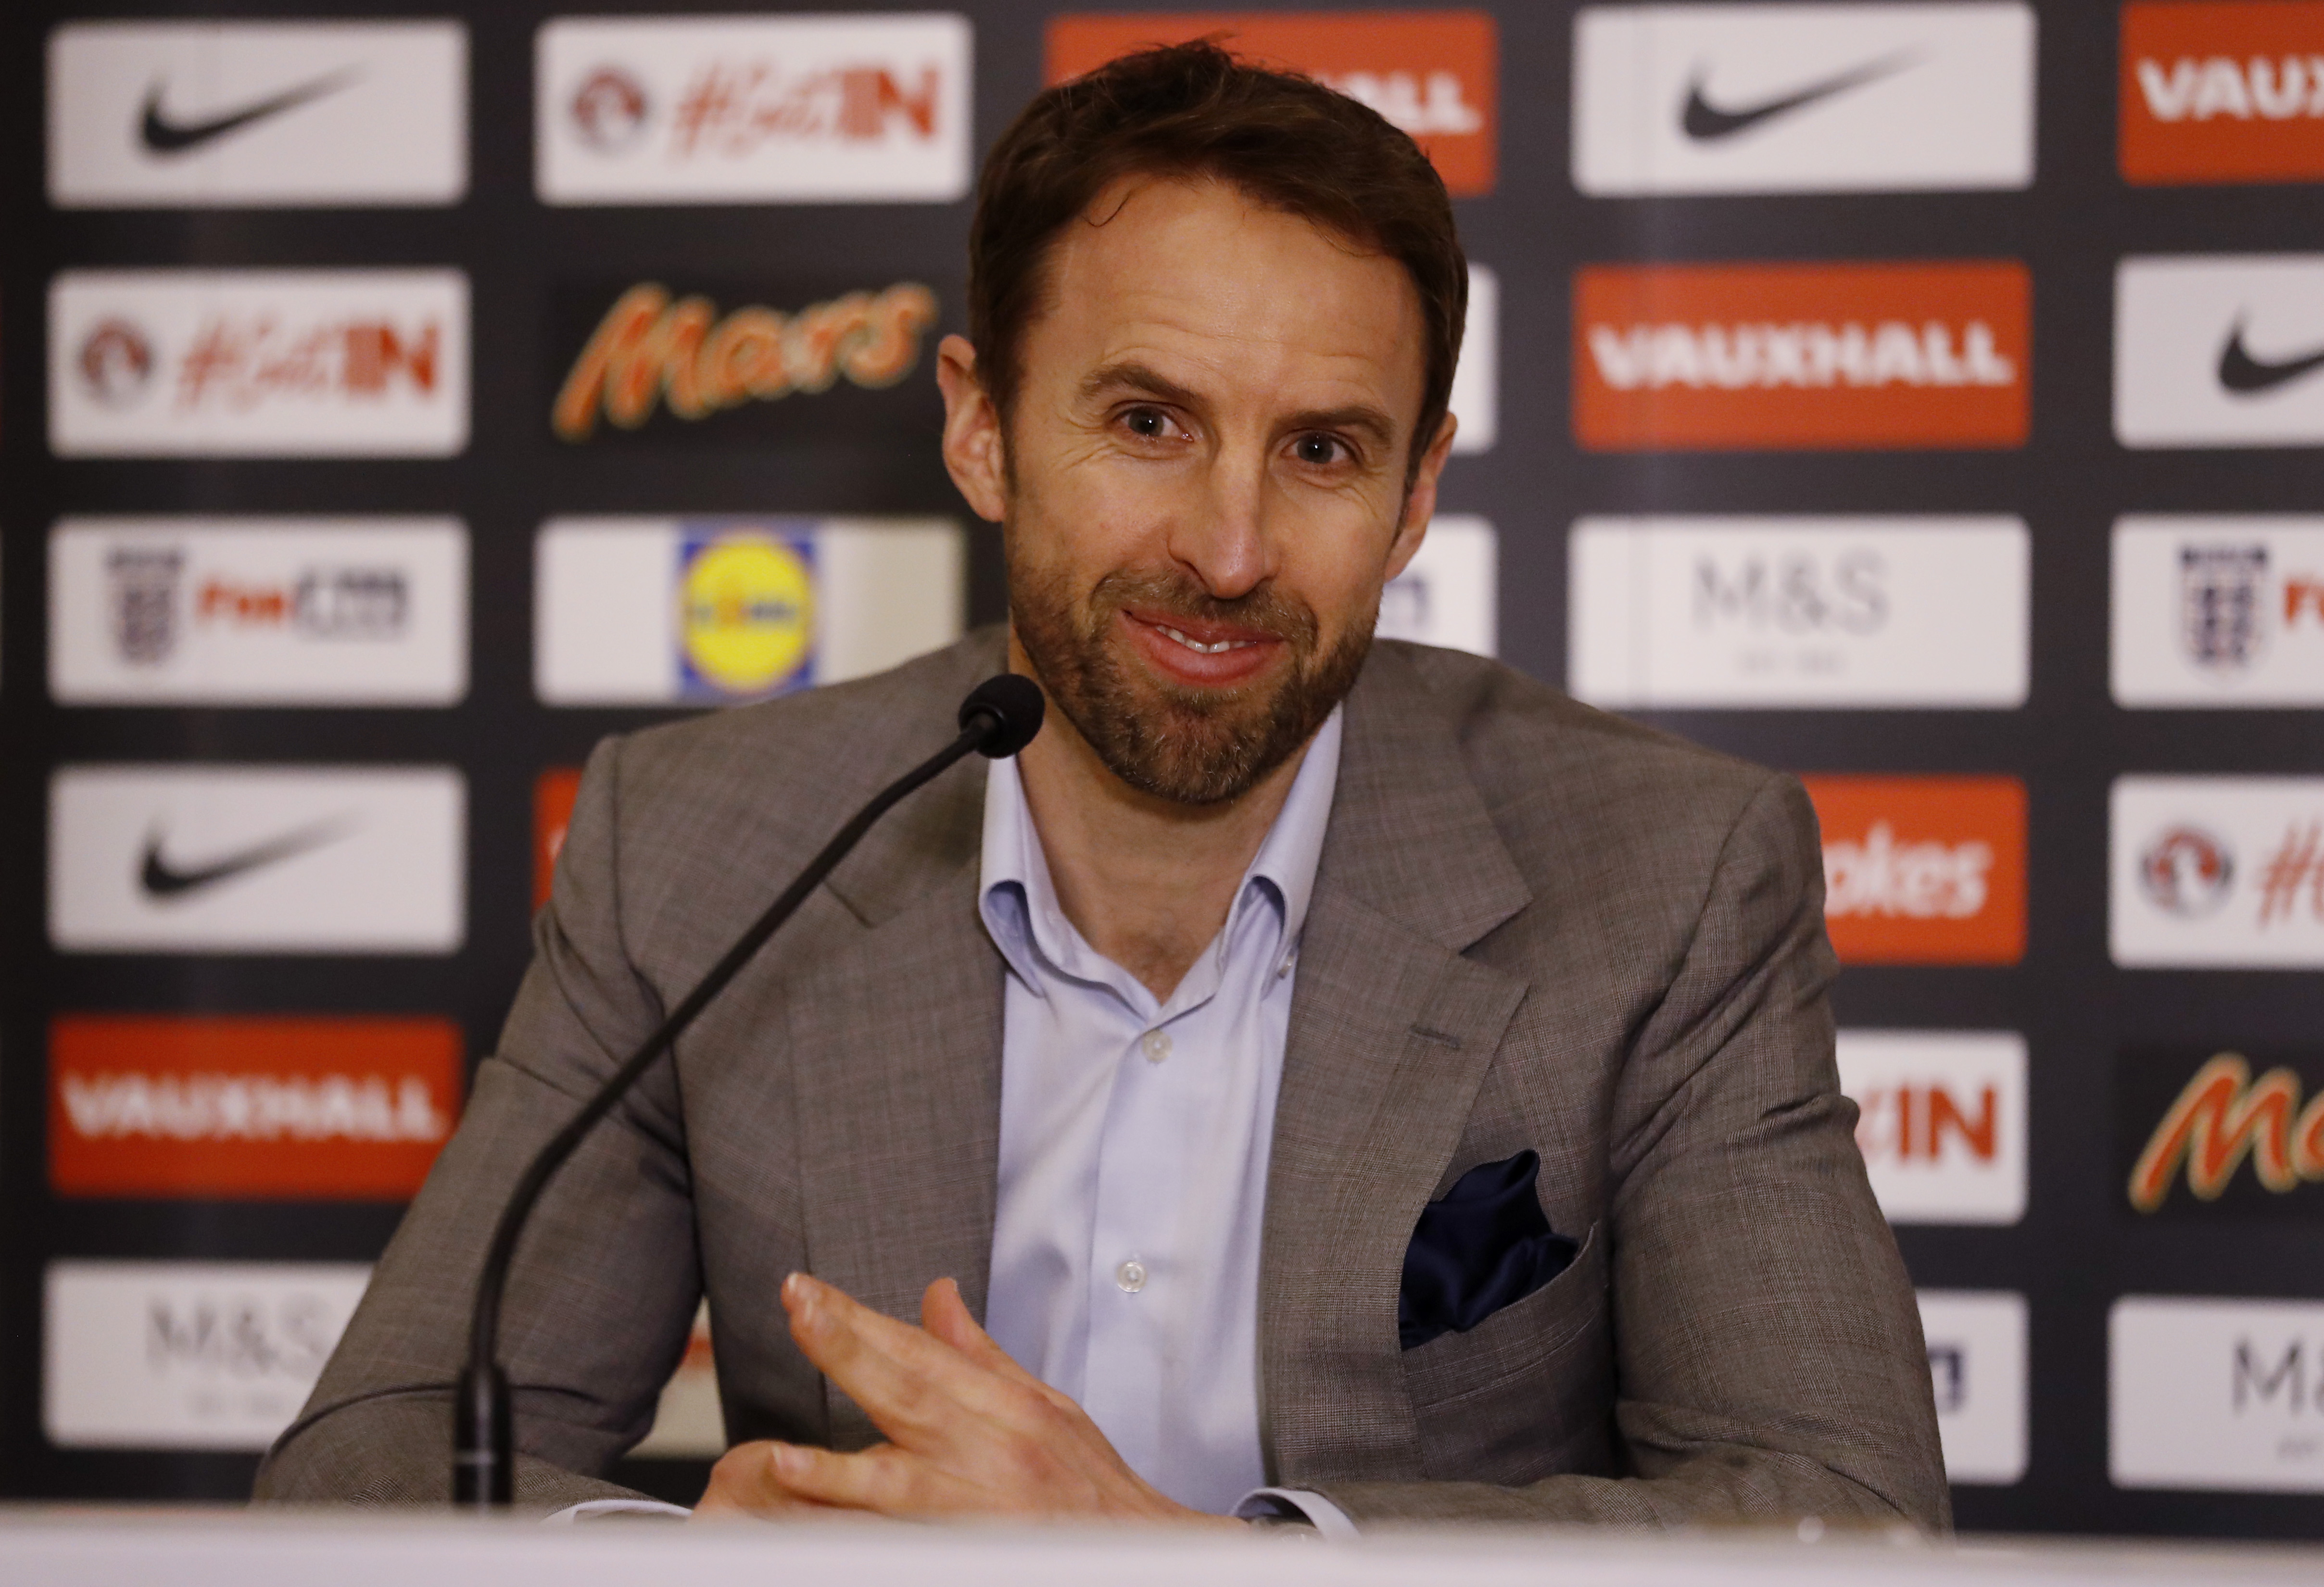 England manager Gareth Southgate during the press conference